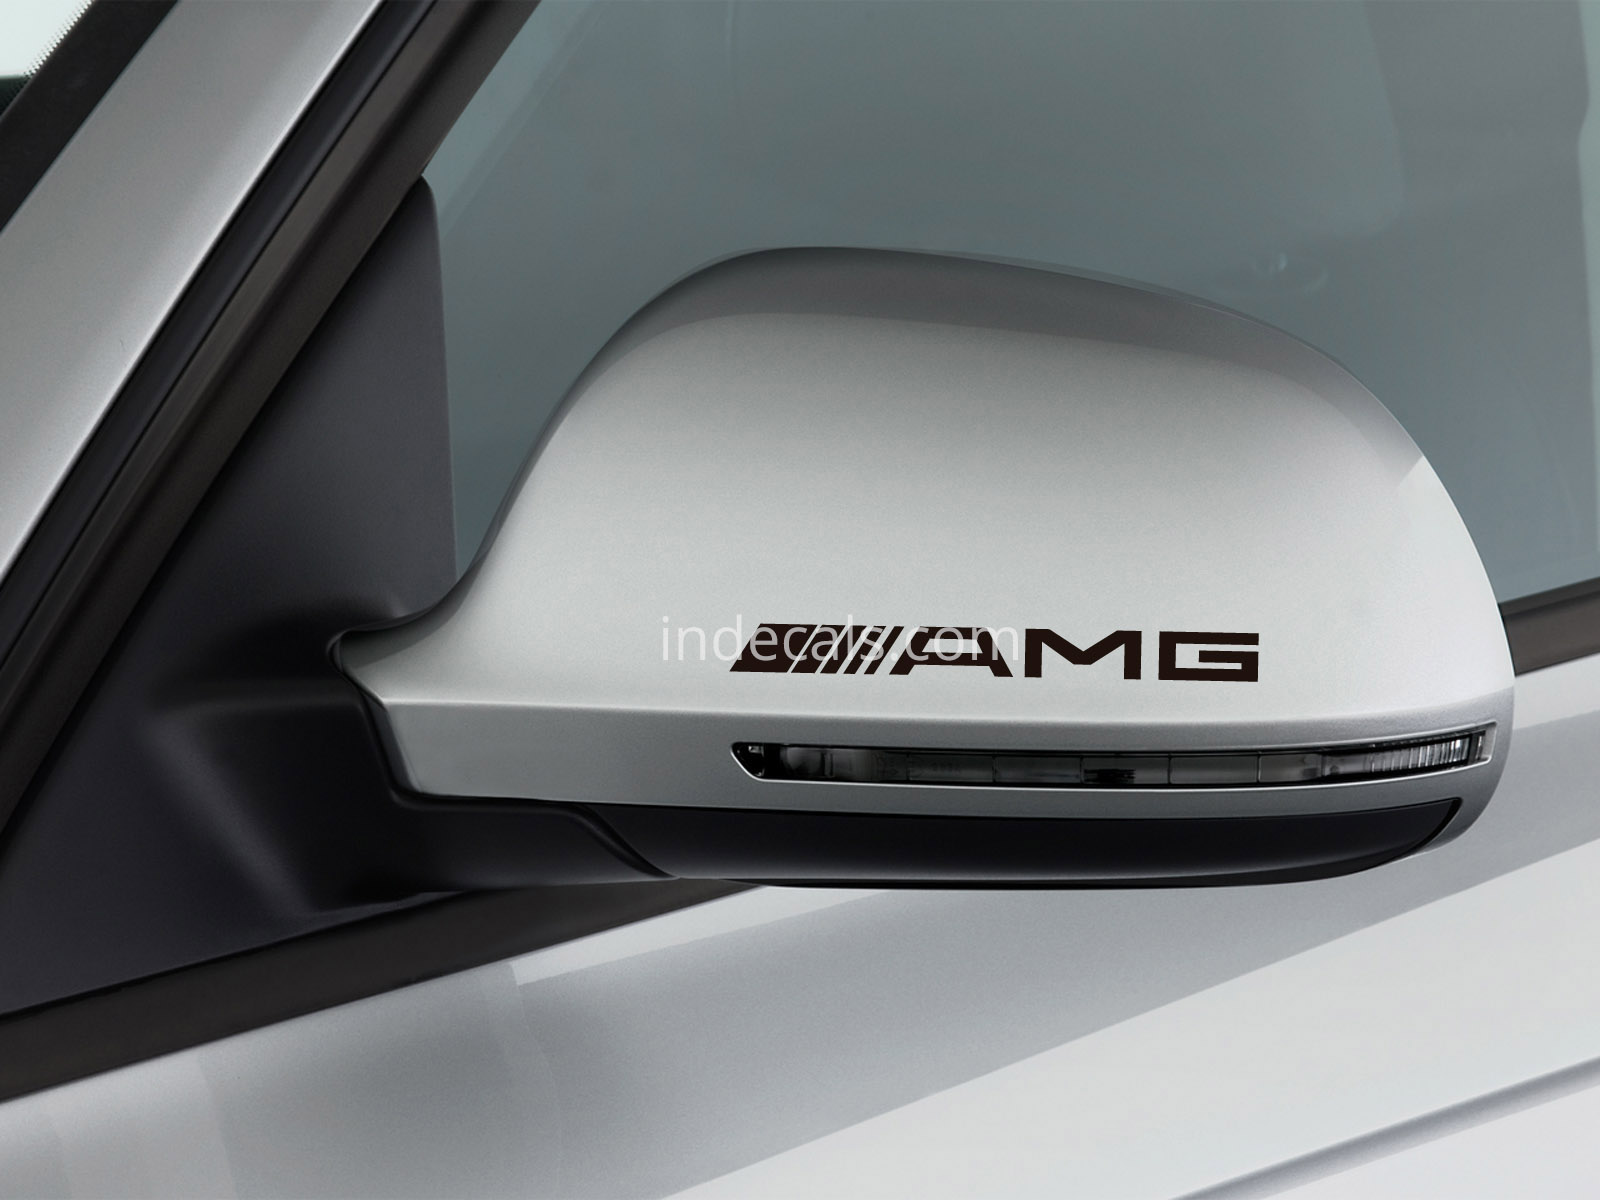 3 x AMG Stickers for Mirrors - Black